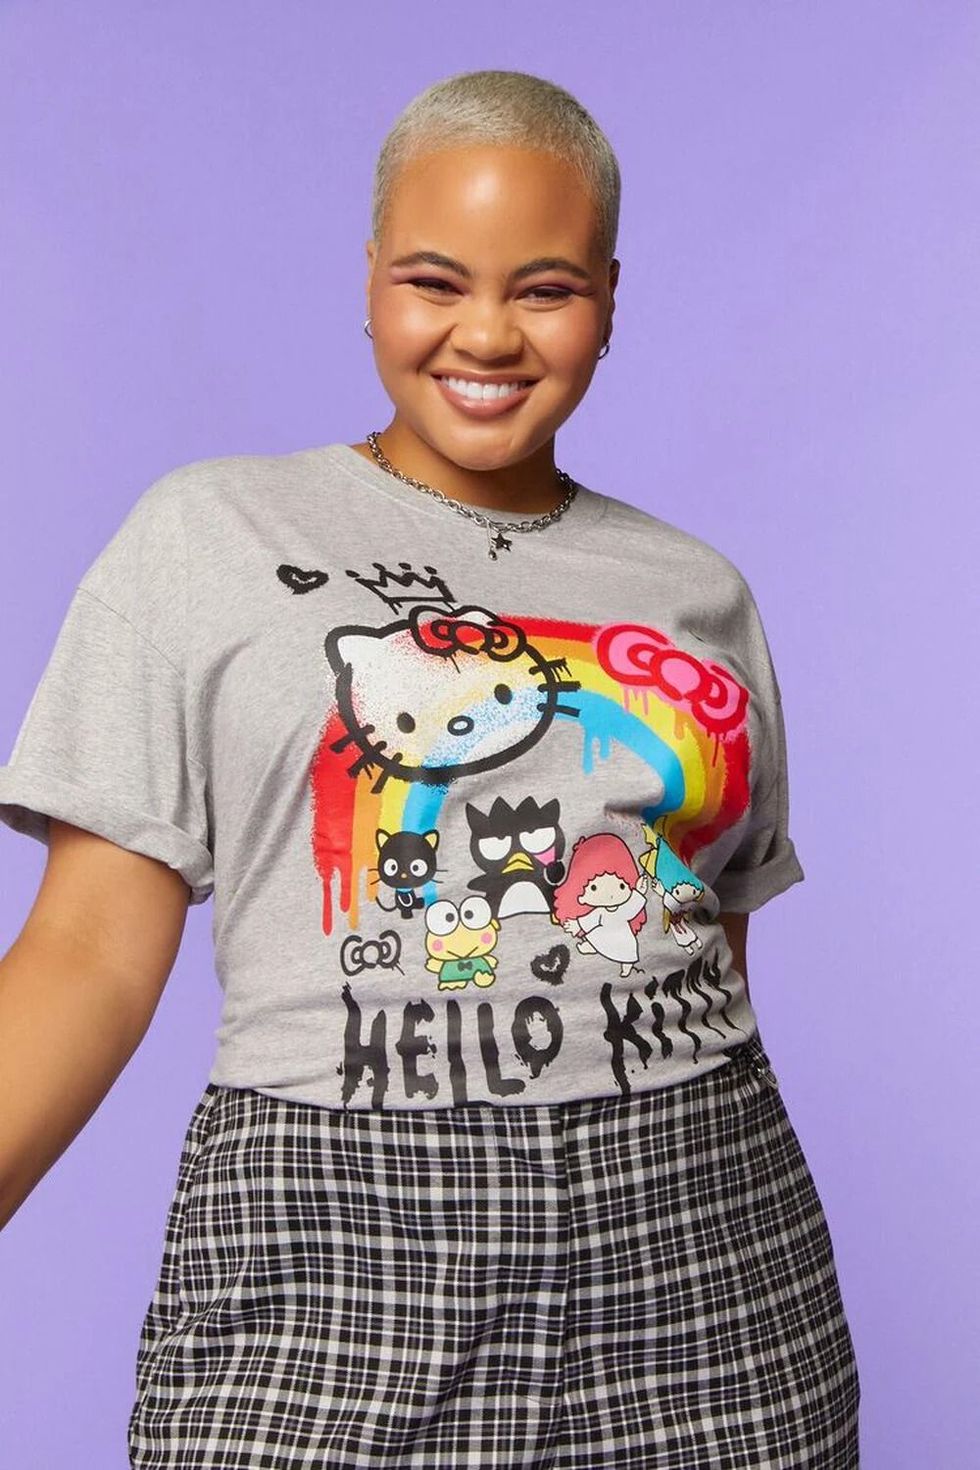 Forever 21 Just Dropped a Hello Kitty Line, and It's Everything You Could  Want